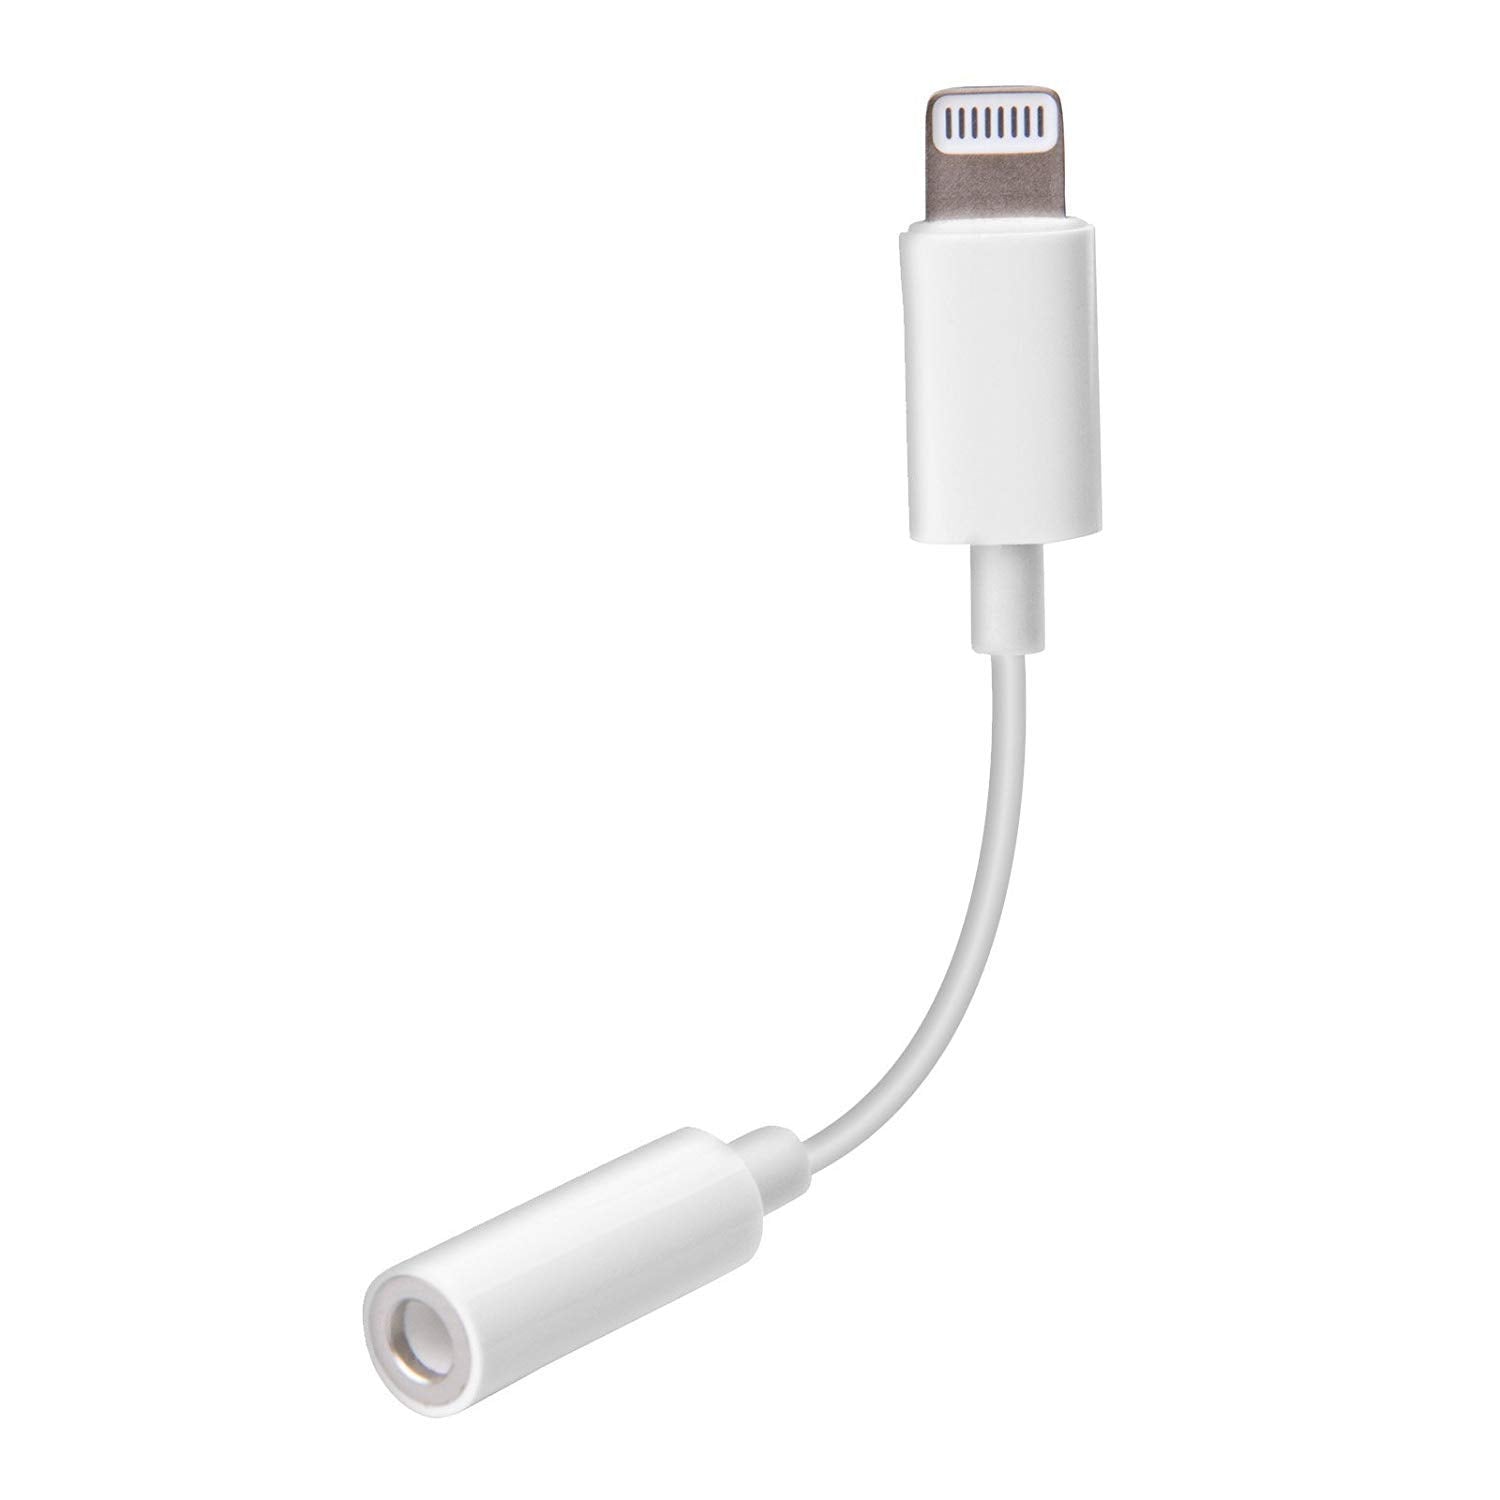 Apple iPod touch 6th Generation Heaphone Jack Connector (Lightning to 3.5mm)